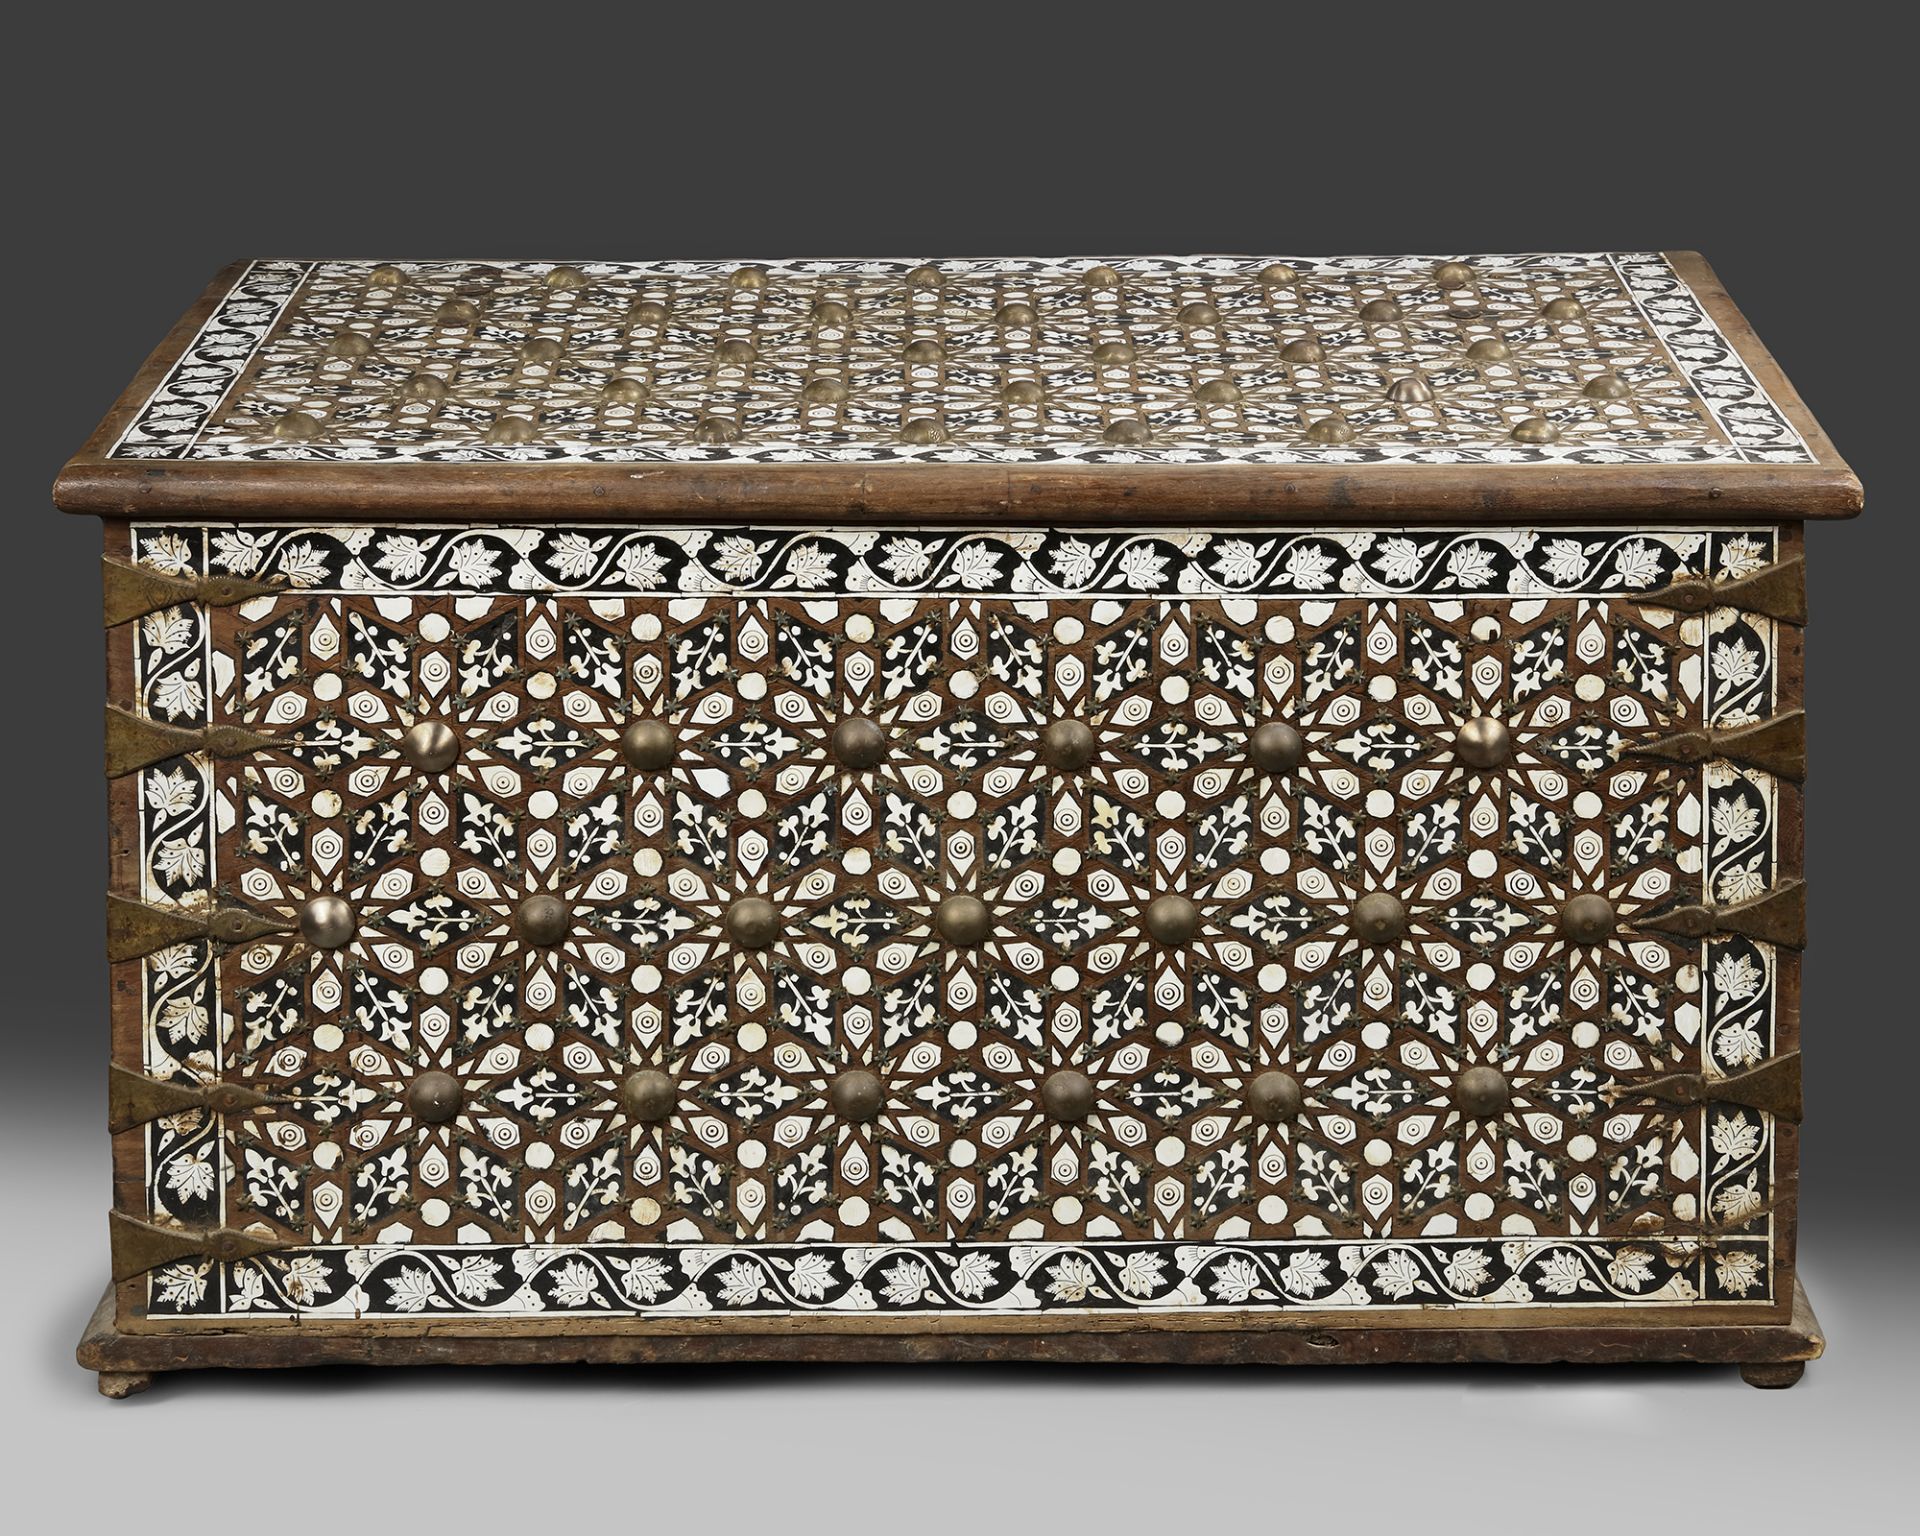 A LARGE OTTOMAN BONE INLAID WOODEN CHEST, SYRIA, LATE 19TH-EARLY 20TH CENTURY - Image 3 of 5